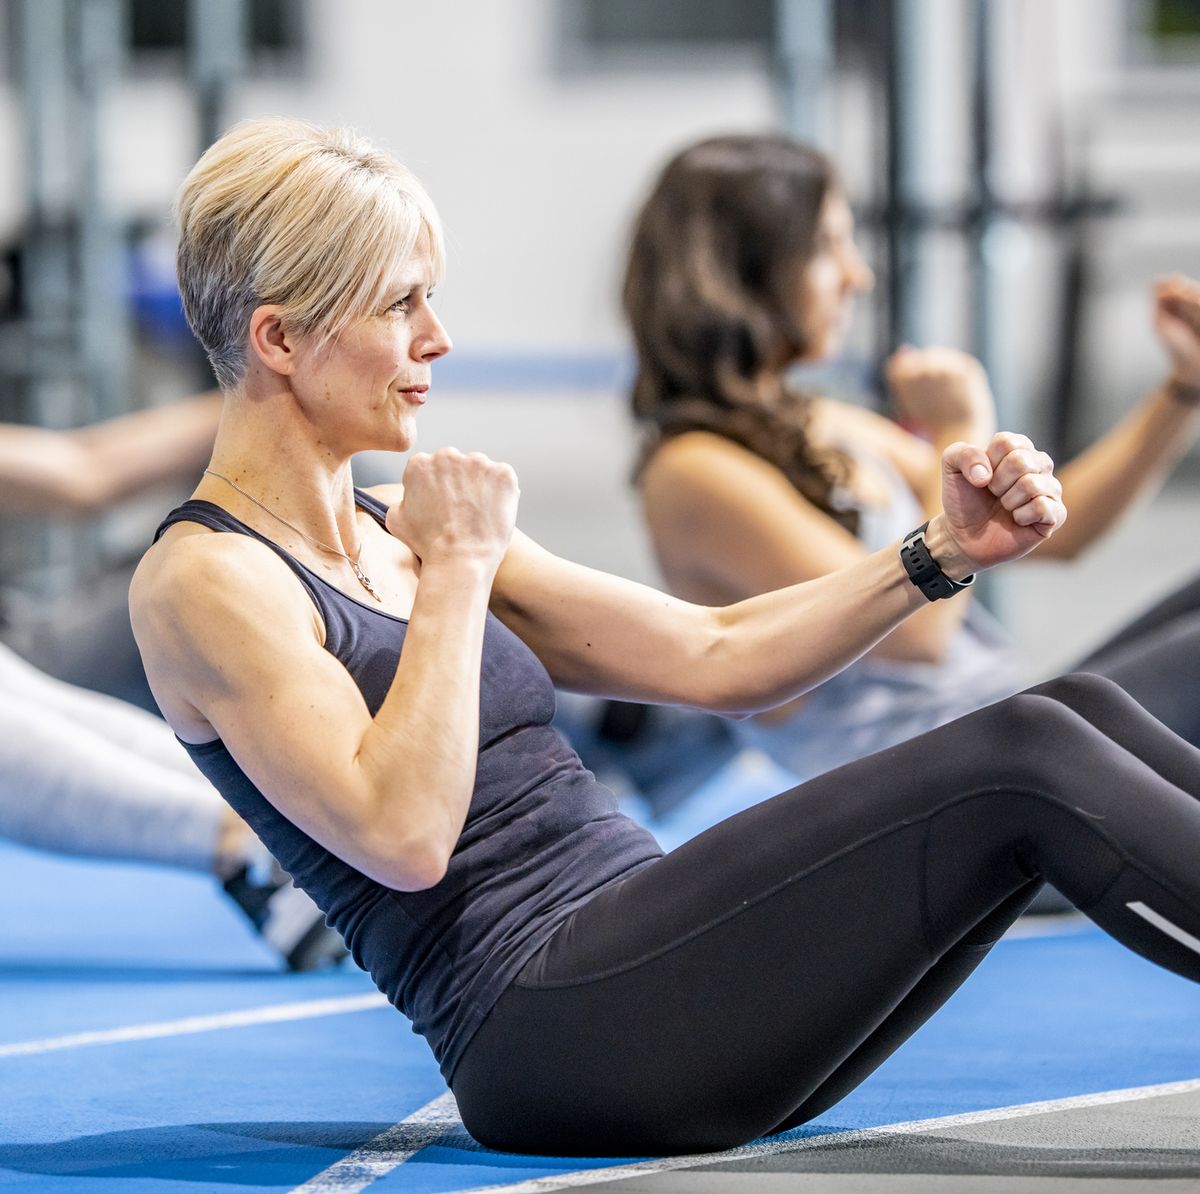 What Is A Pilates Workout Like And What Is It Good For?